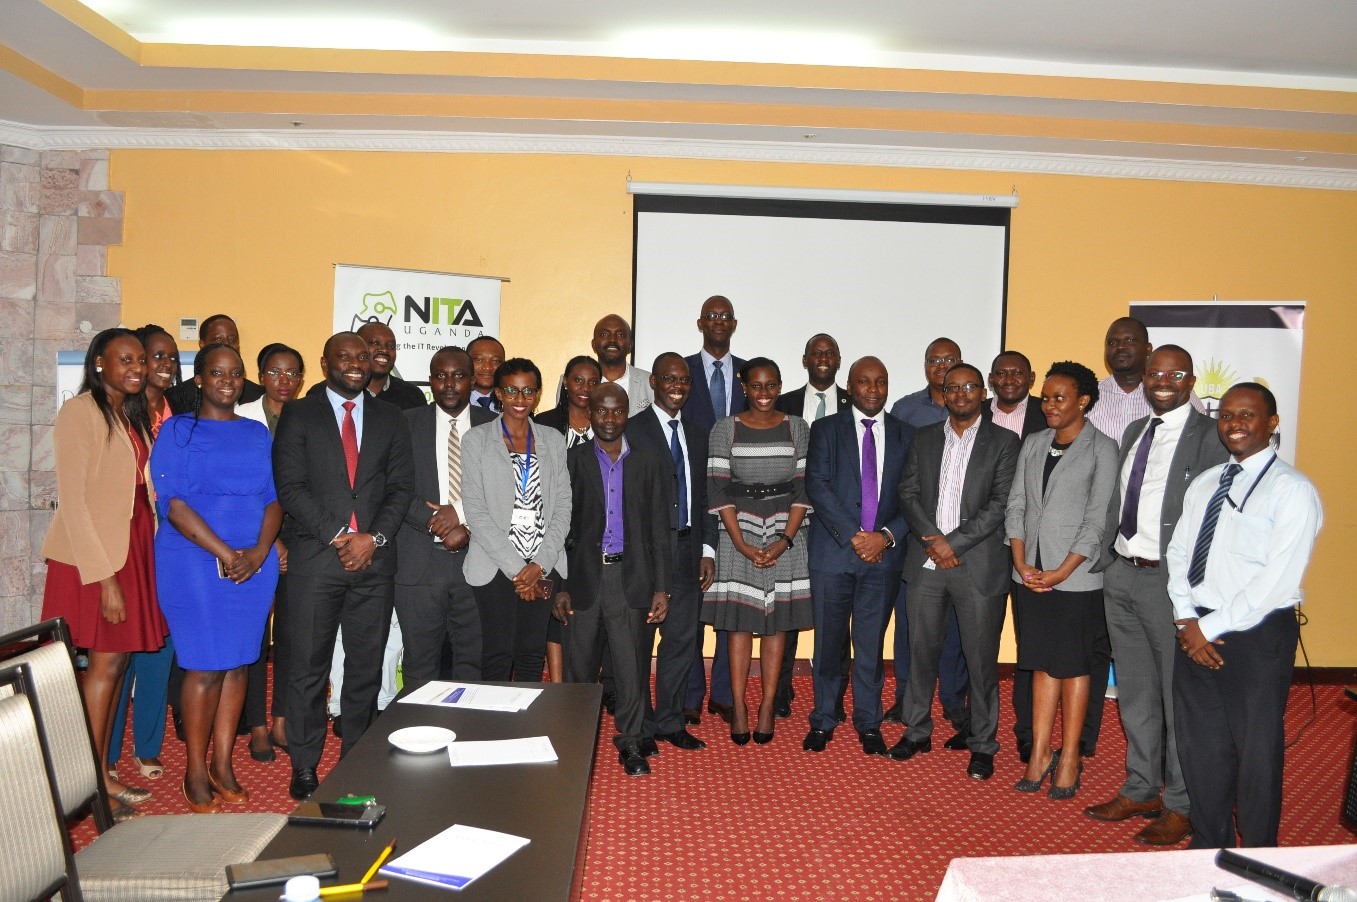 Uganda Bankers Association and NITA-U Officials pose for a picture.